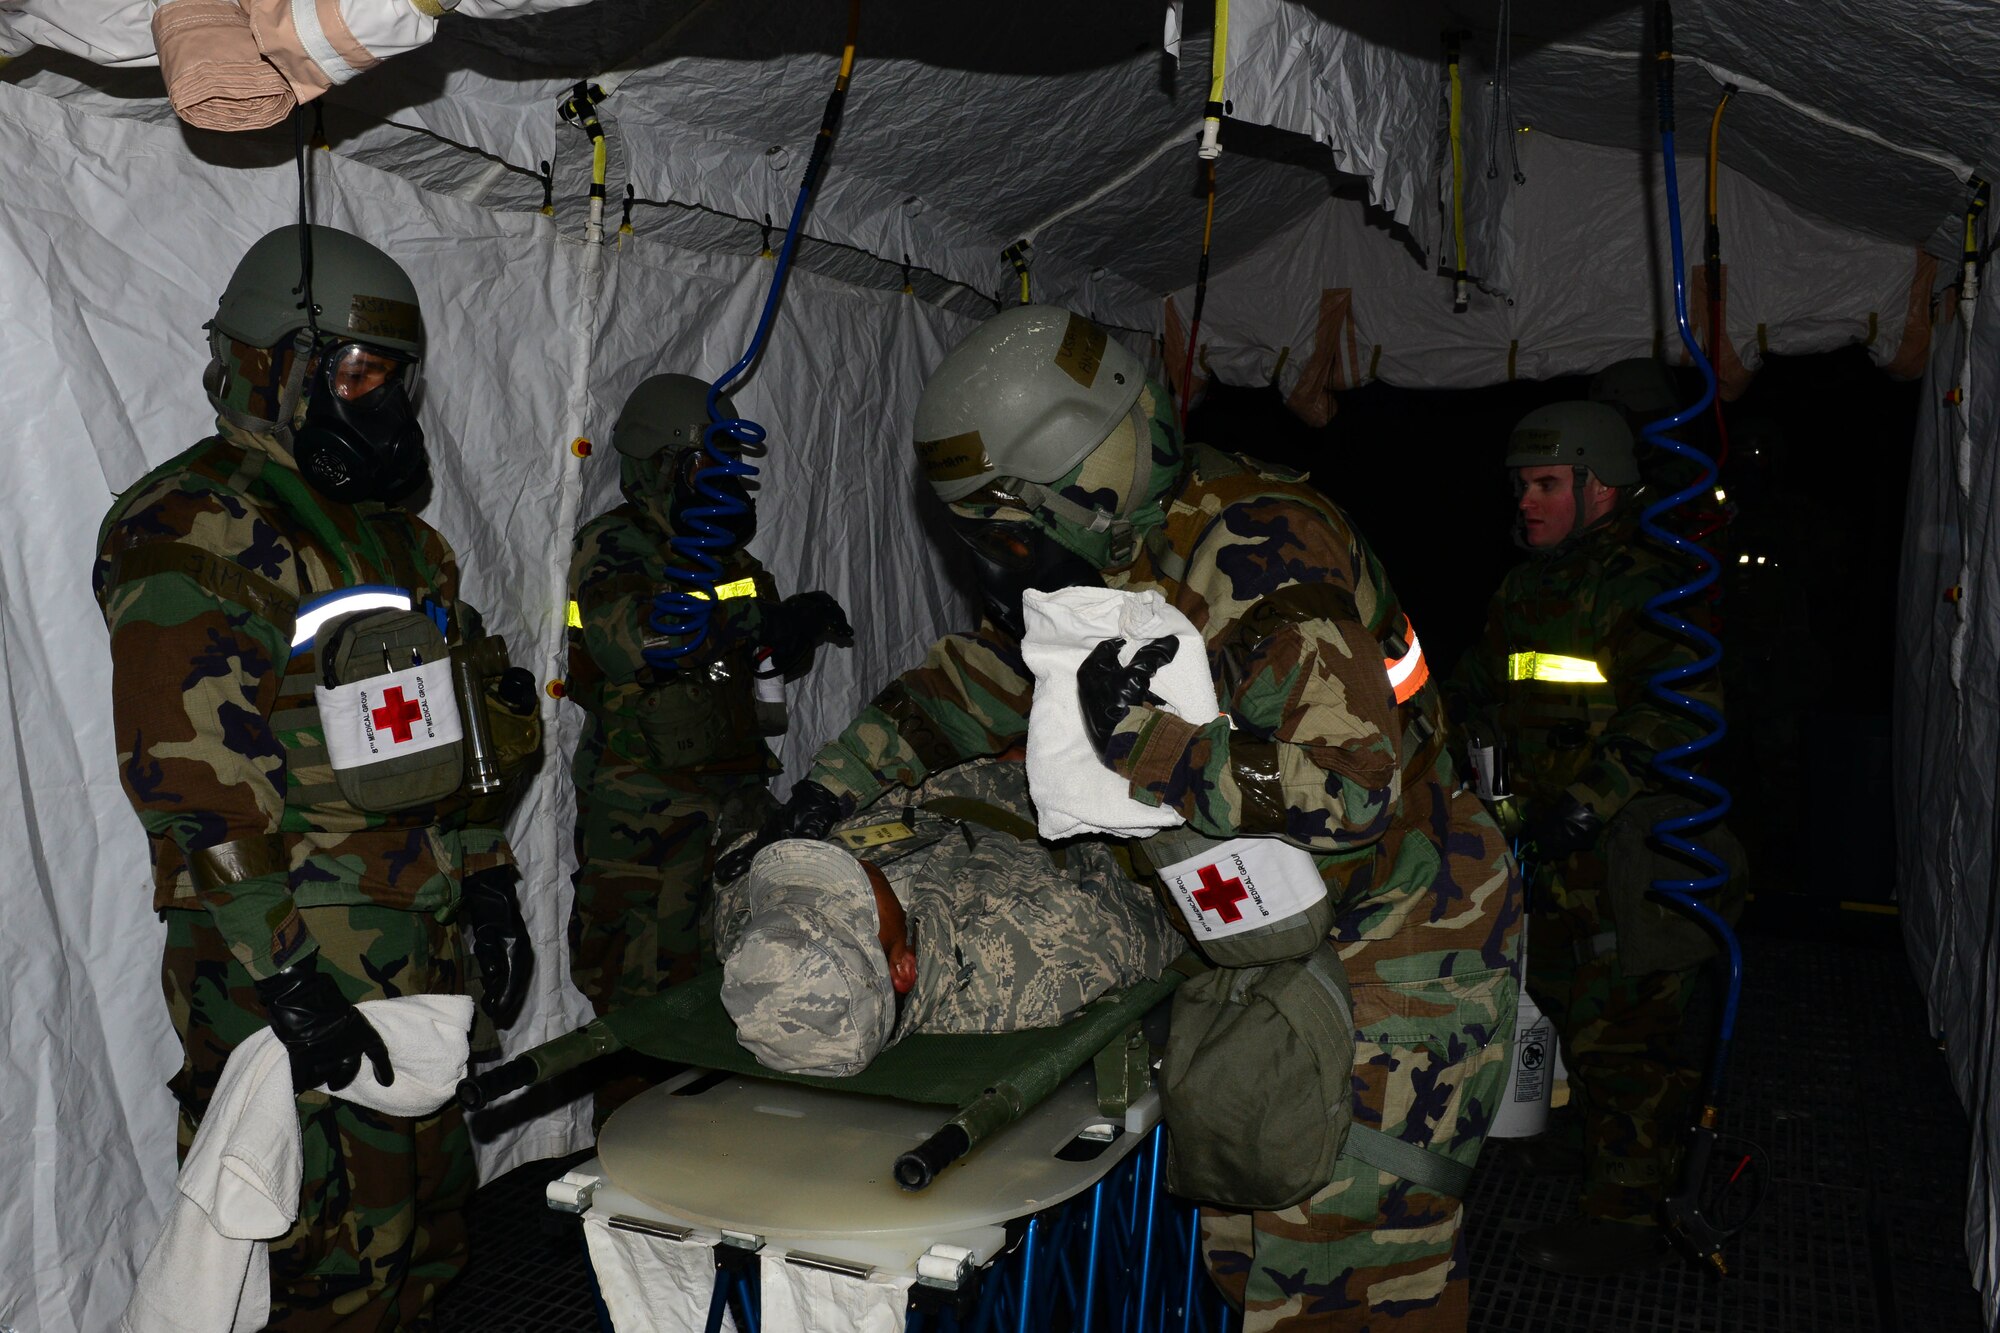 The 8th Medical Group decontamination team perform an in-place patient decon during the Beverly Midnight 16-1 exercise Mar. 9, 2016. The team performed a decon on six individuals before taking them in as patients during the exercise. (U.S. Air Force photo by Senior Airman Ashley L. Gardner/ Released)